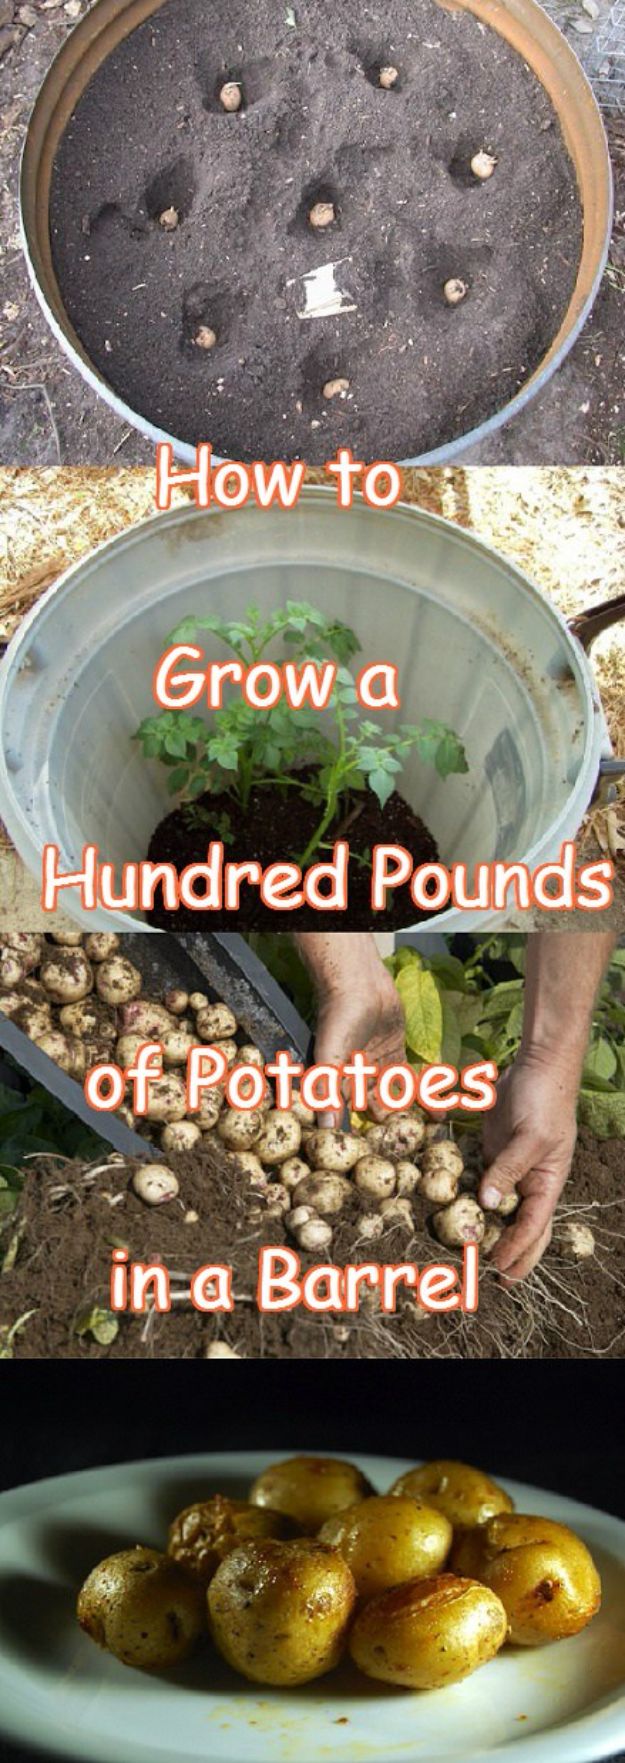 Container Gardening Ideas - Grow Potatoes In A Barrel - Easy Garden Projects for Containers and Growing Plants in Small Spaces - DIY Potting Tips and Planter Boxes for Vegetables, Herbs and Flowers - Simple Ideas for Beginners -Shade, Full Sun, Pation and Yard Landscape Idea tutorials 